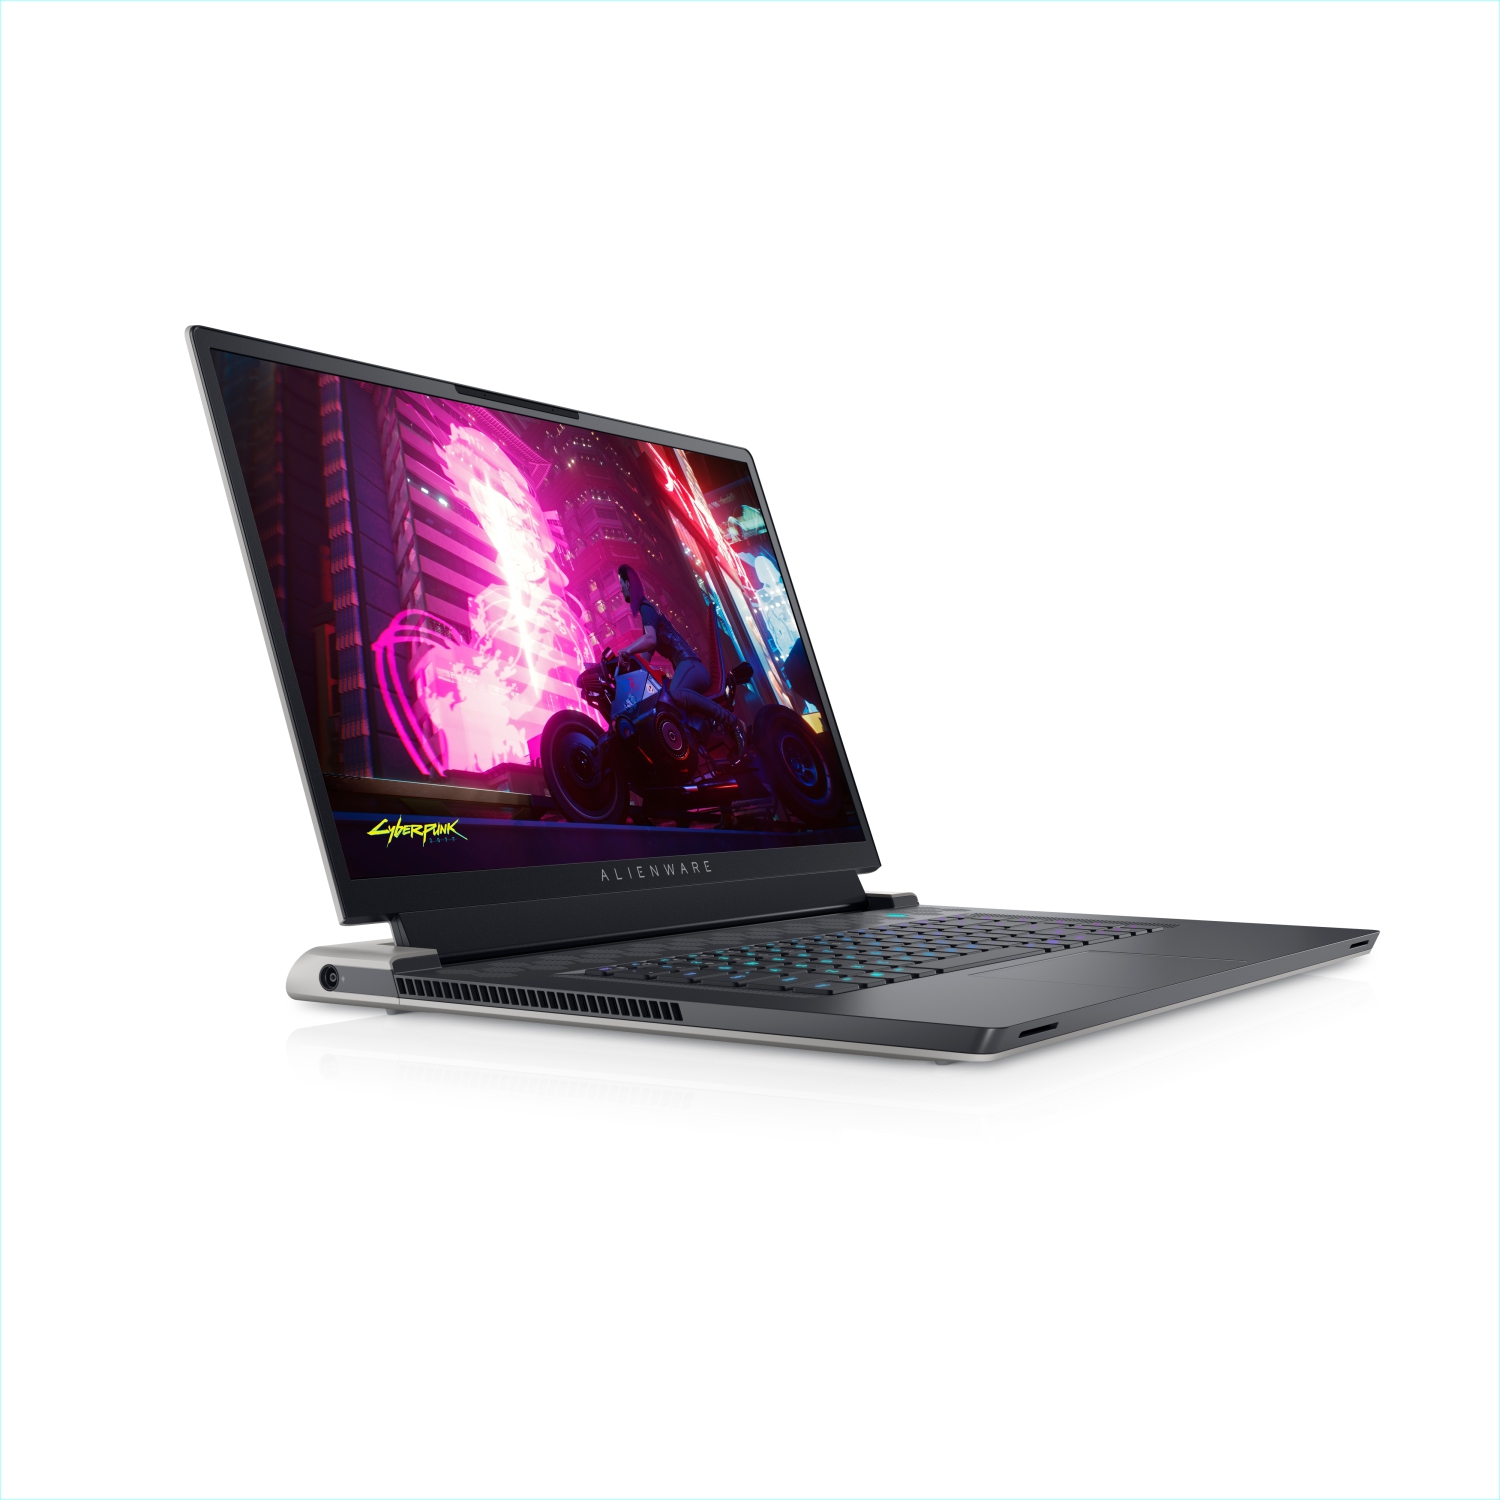 Refurbished (Excellent) – Dell Alienware X17 R1 Gaming Laptop (2021) | 17.3" 4K | Core i7 - 1TB SSD + 1TB SSD - 32GB RAM - RTX 3080 | 8 Cores @ 4.6 GHz - 11th Gen CPU - 8GB GDDR6X